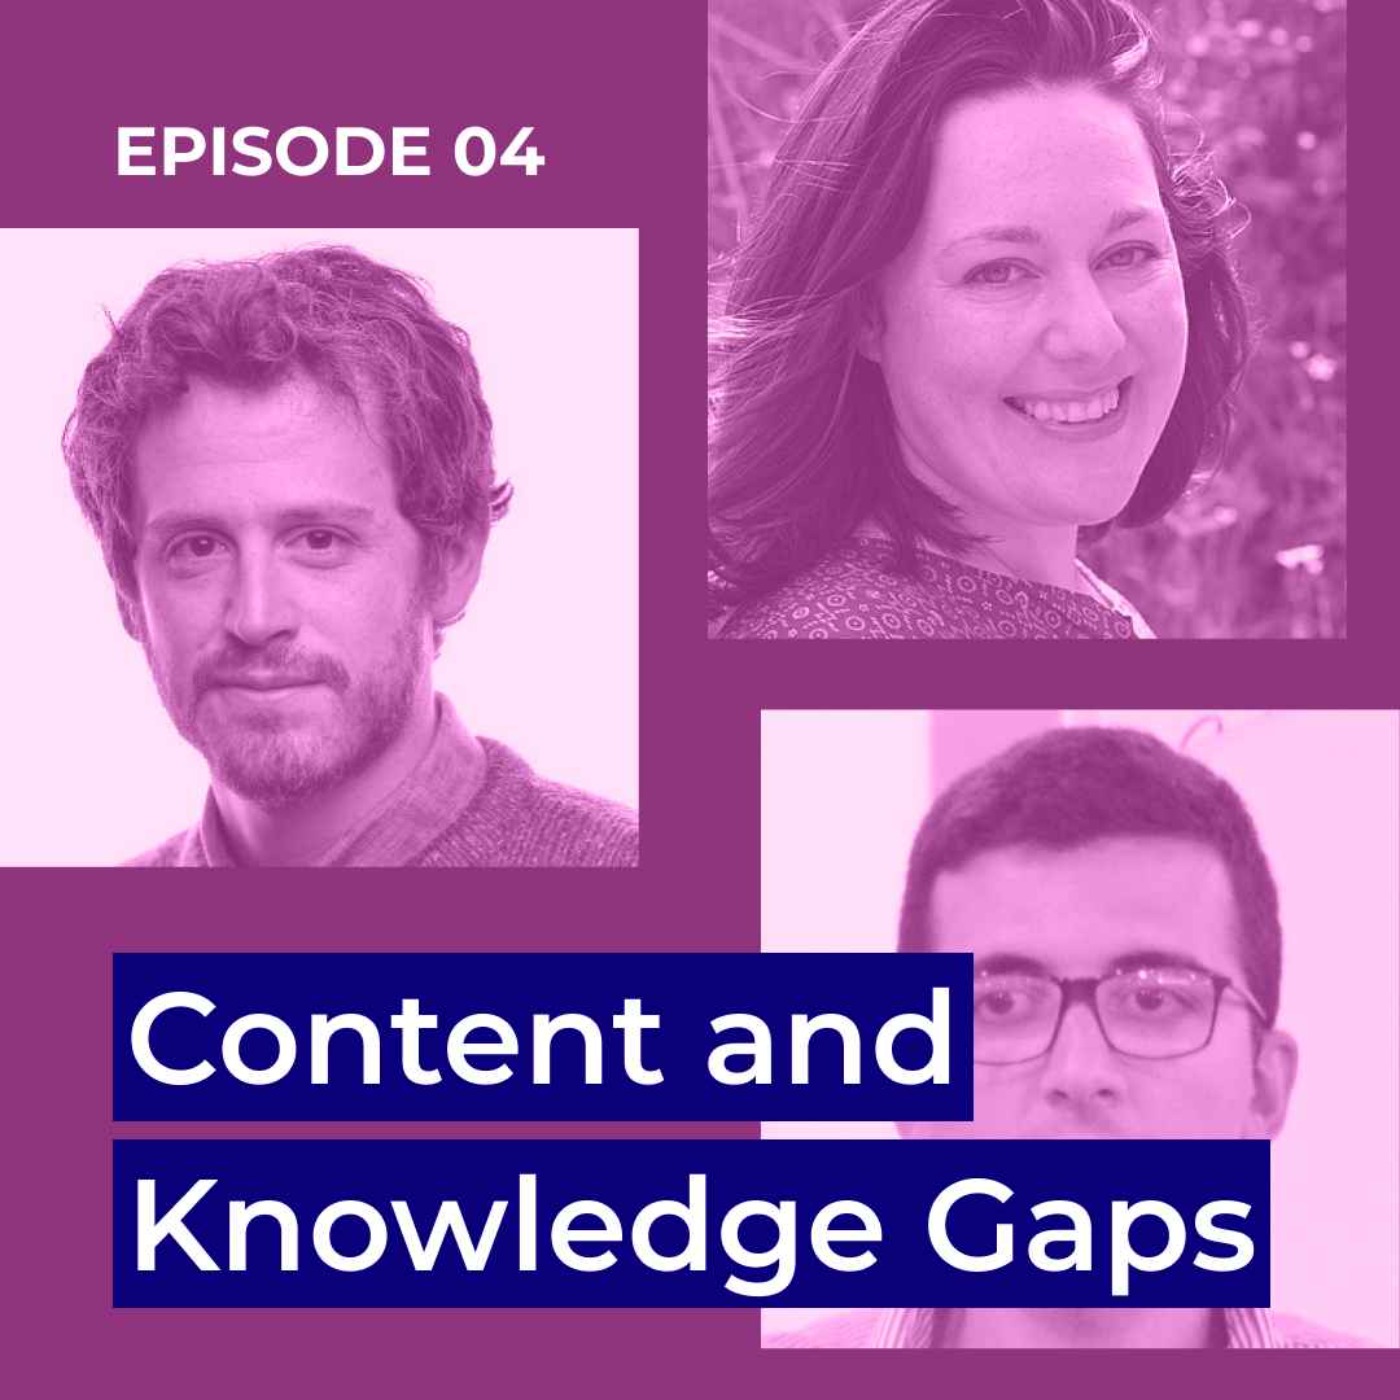 Content and knowledge gaps